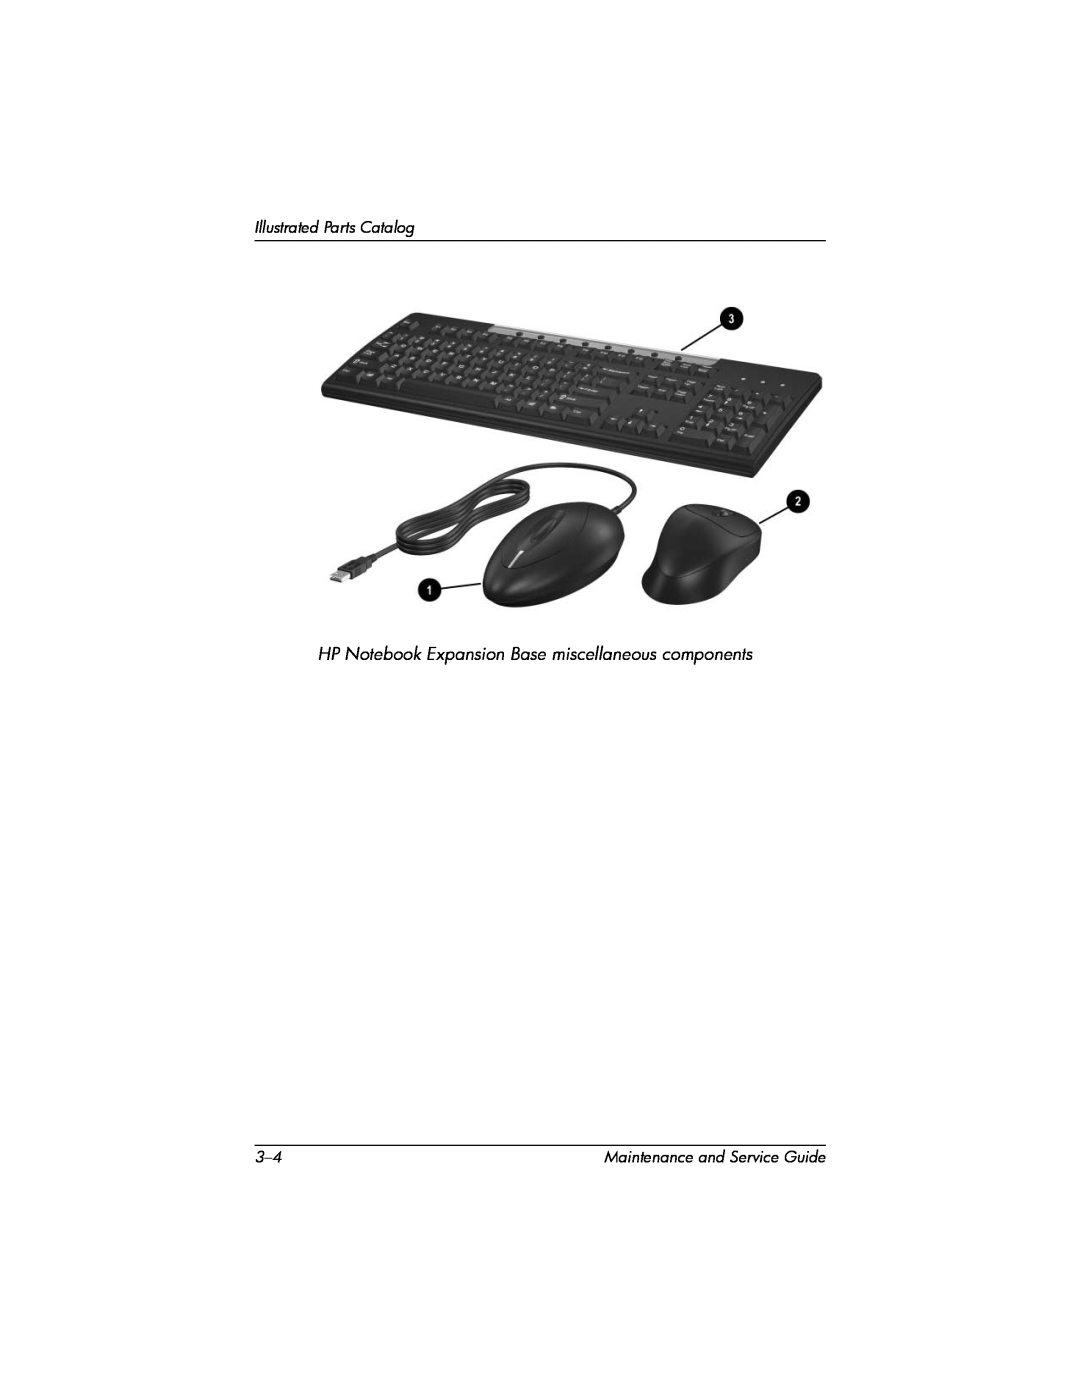 HP R3003US HP Notebook Expansion Base miscellaneous components, Illustrated Parts Catalog, Maintenance and Service Guide 